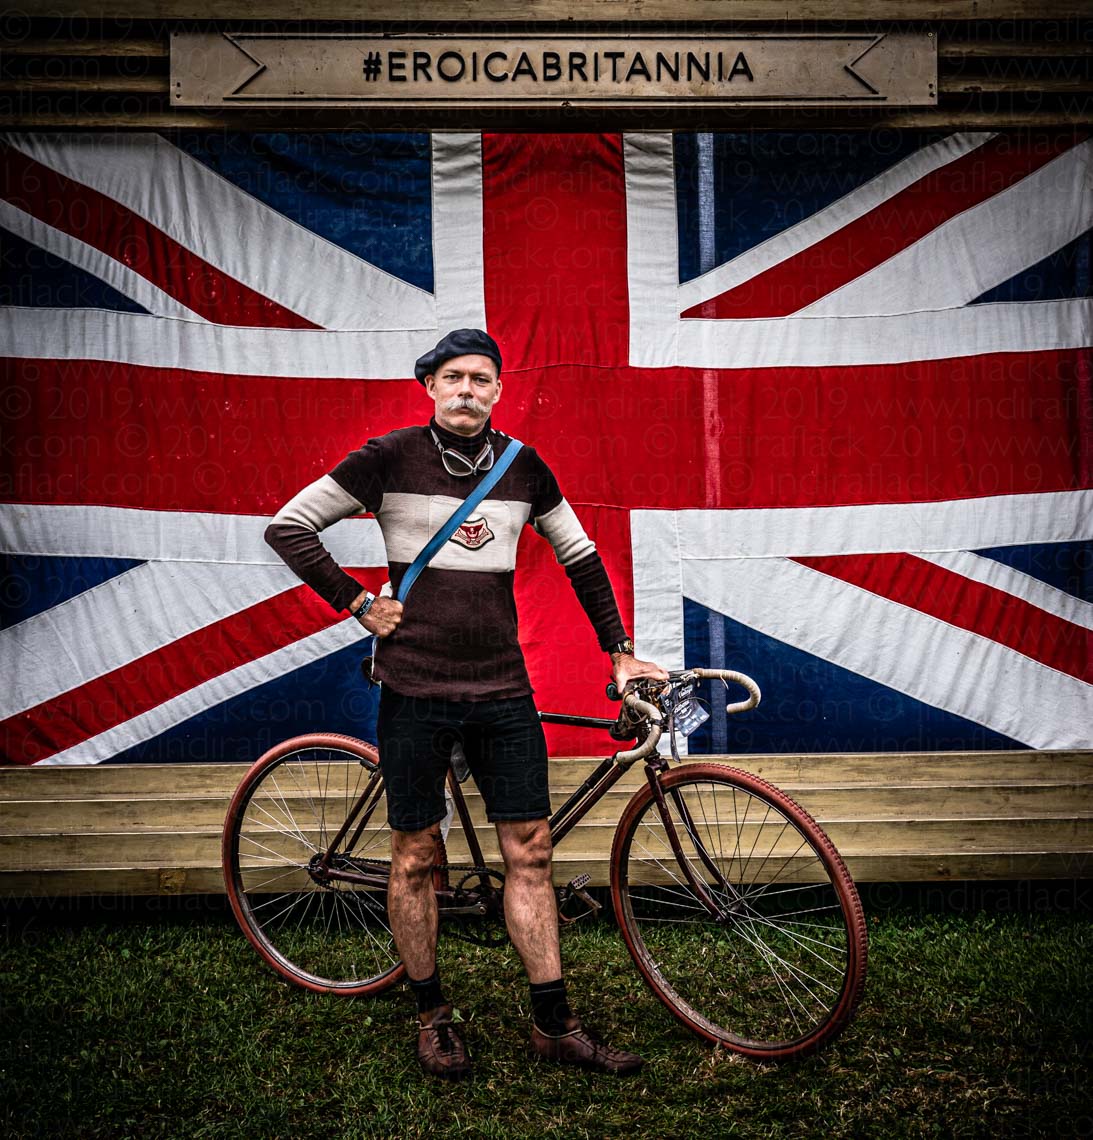 Eroica Britannia Vintage Cycling photographed at Goodwood Revival 2021 by Indira Flack portrait photographer